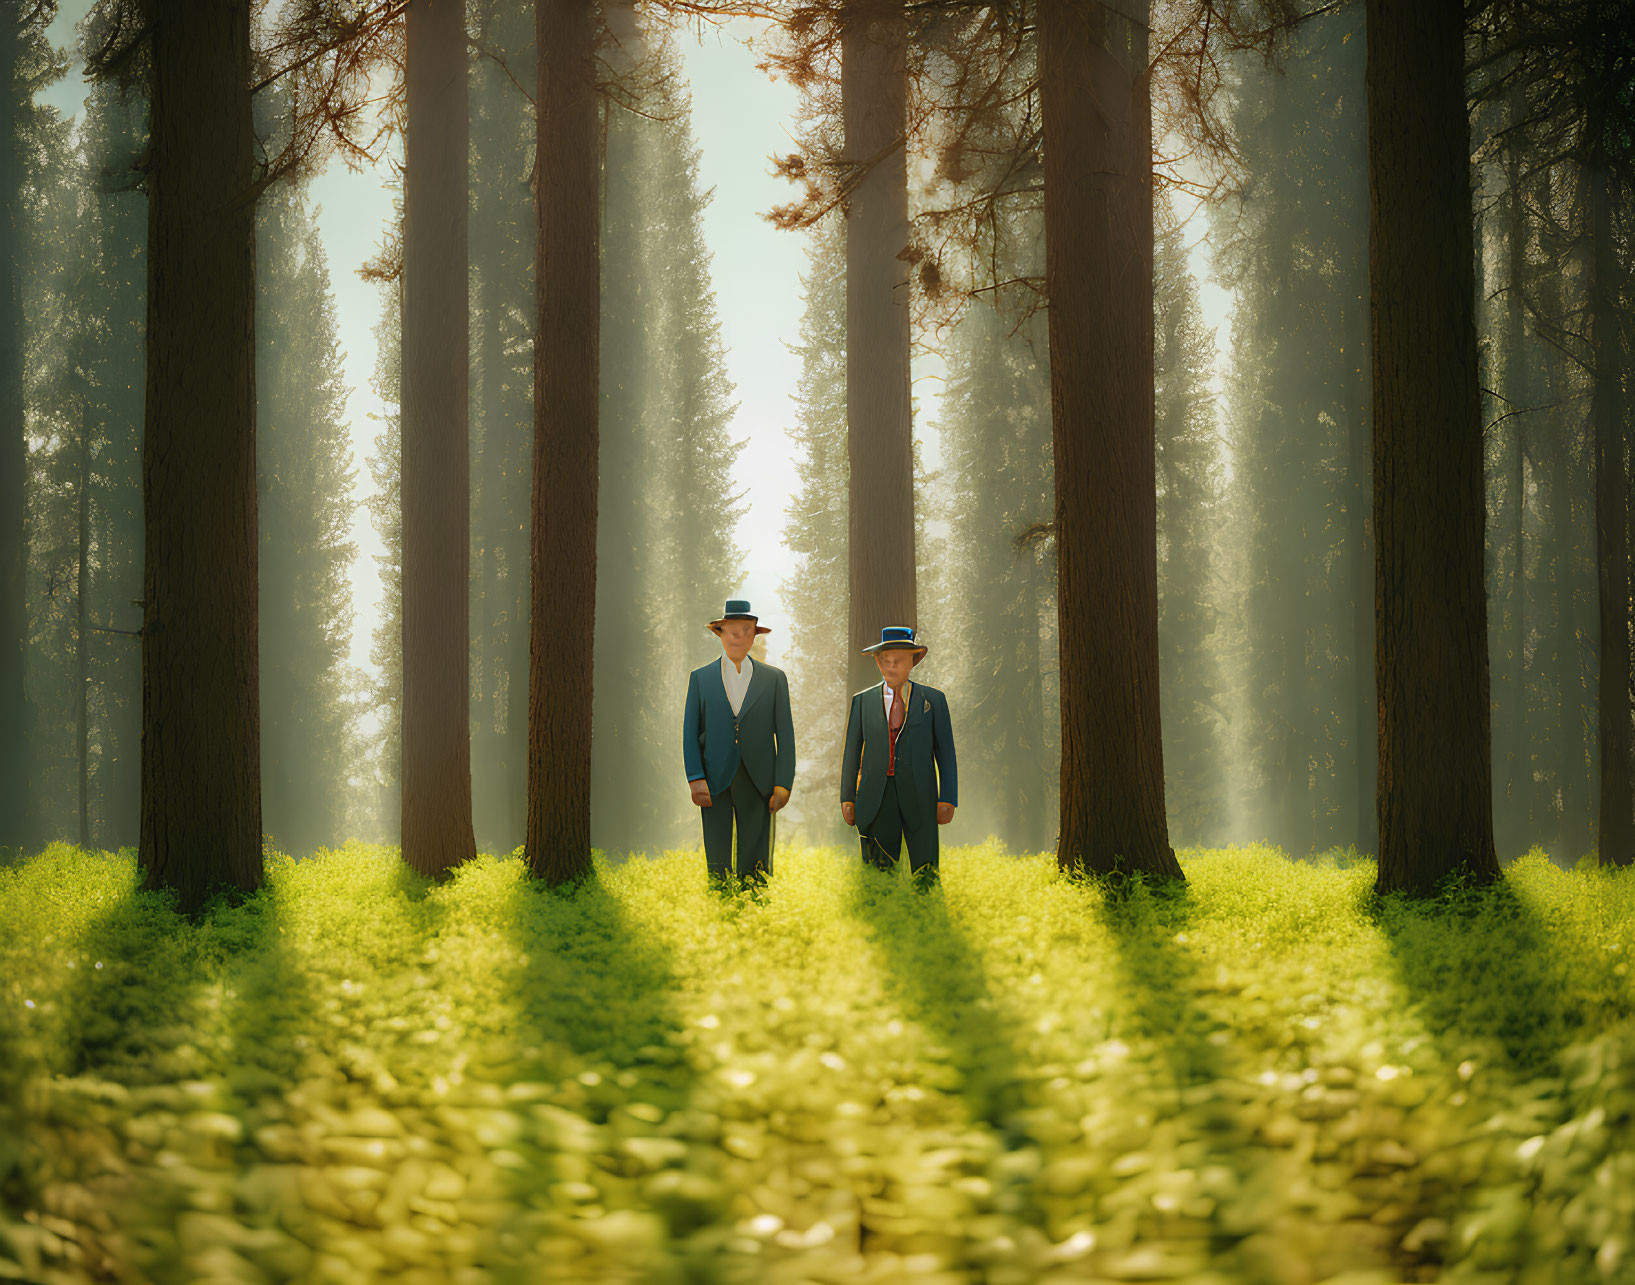 Two individuals in suits walking in a sunlit forest with tall trees and lush greenery